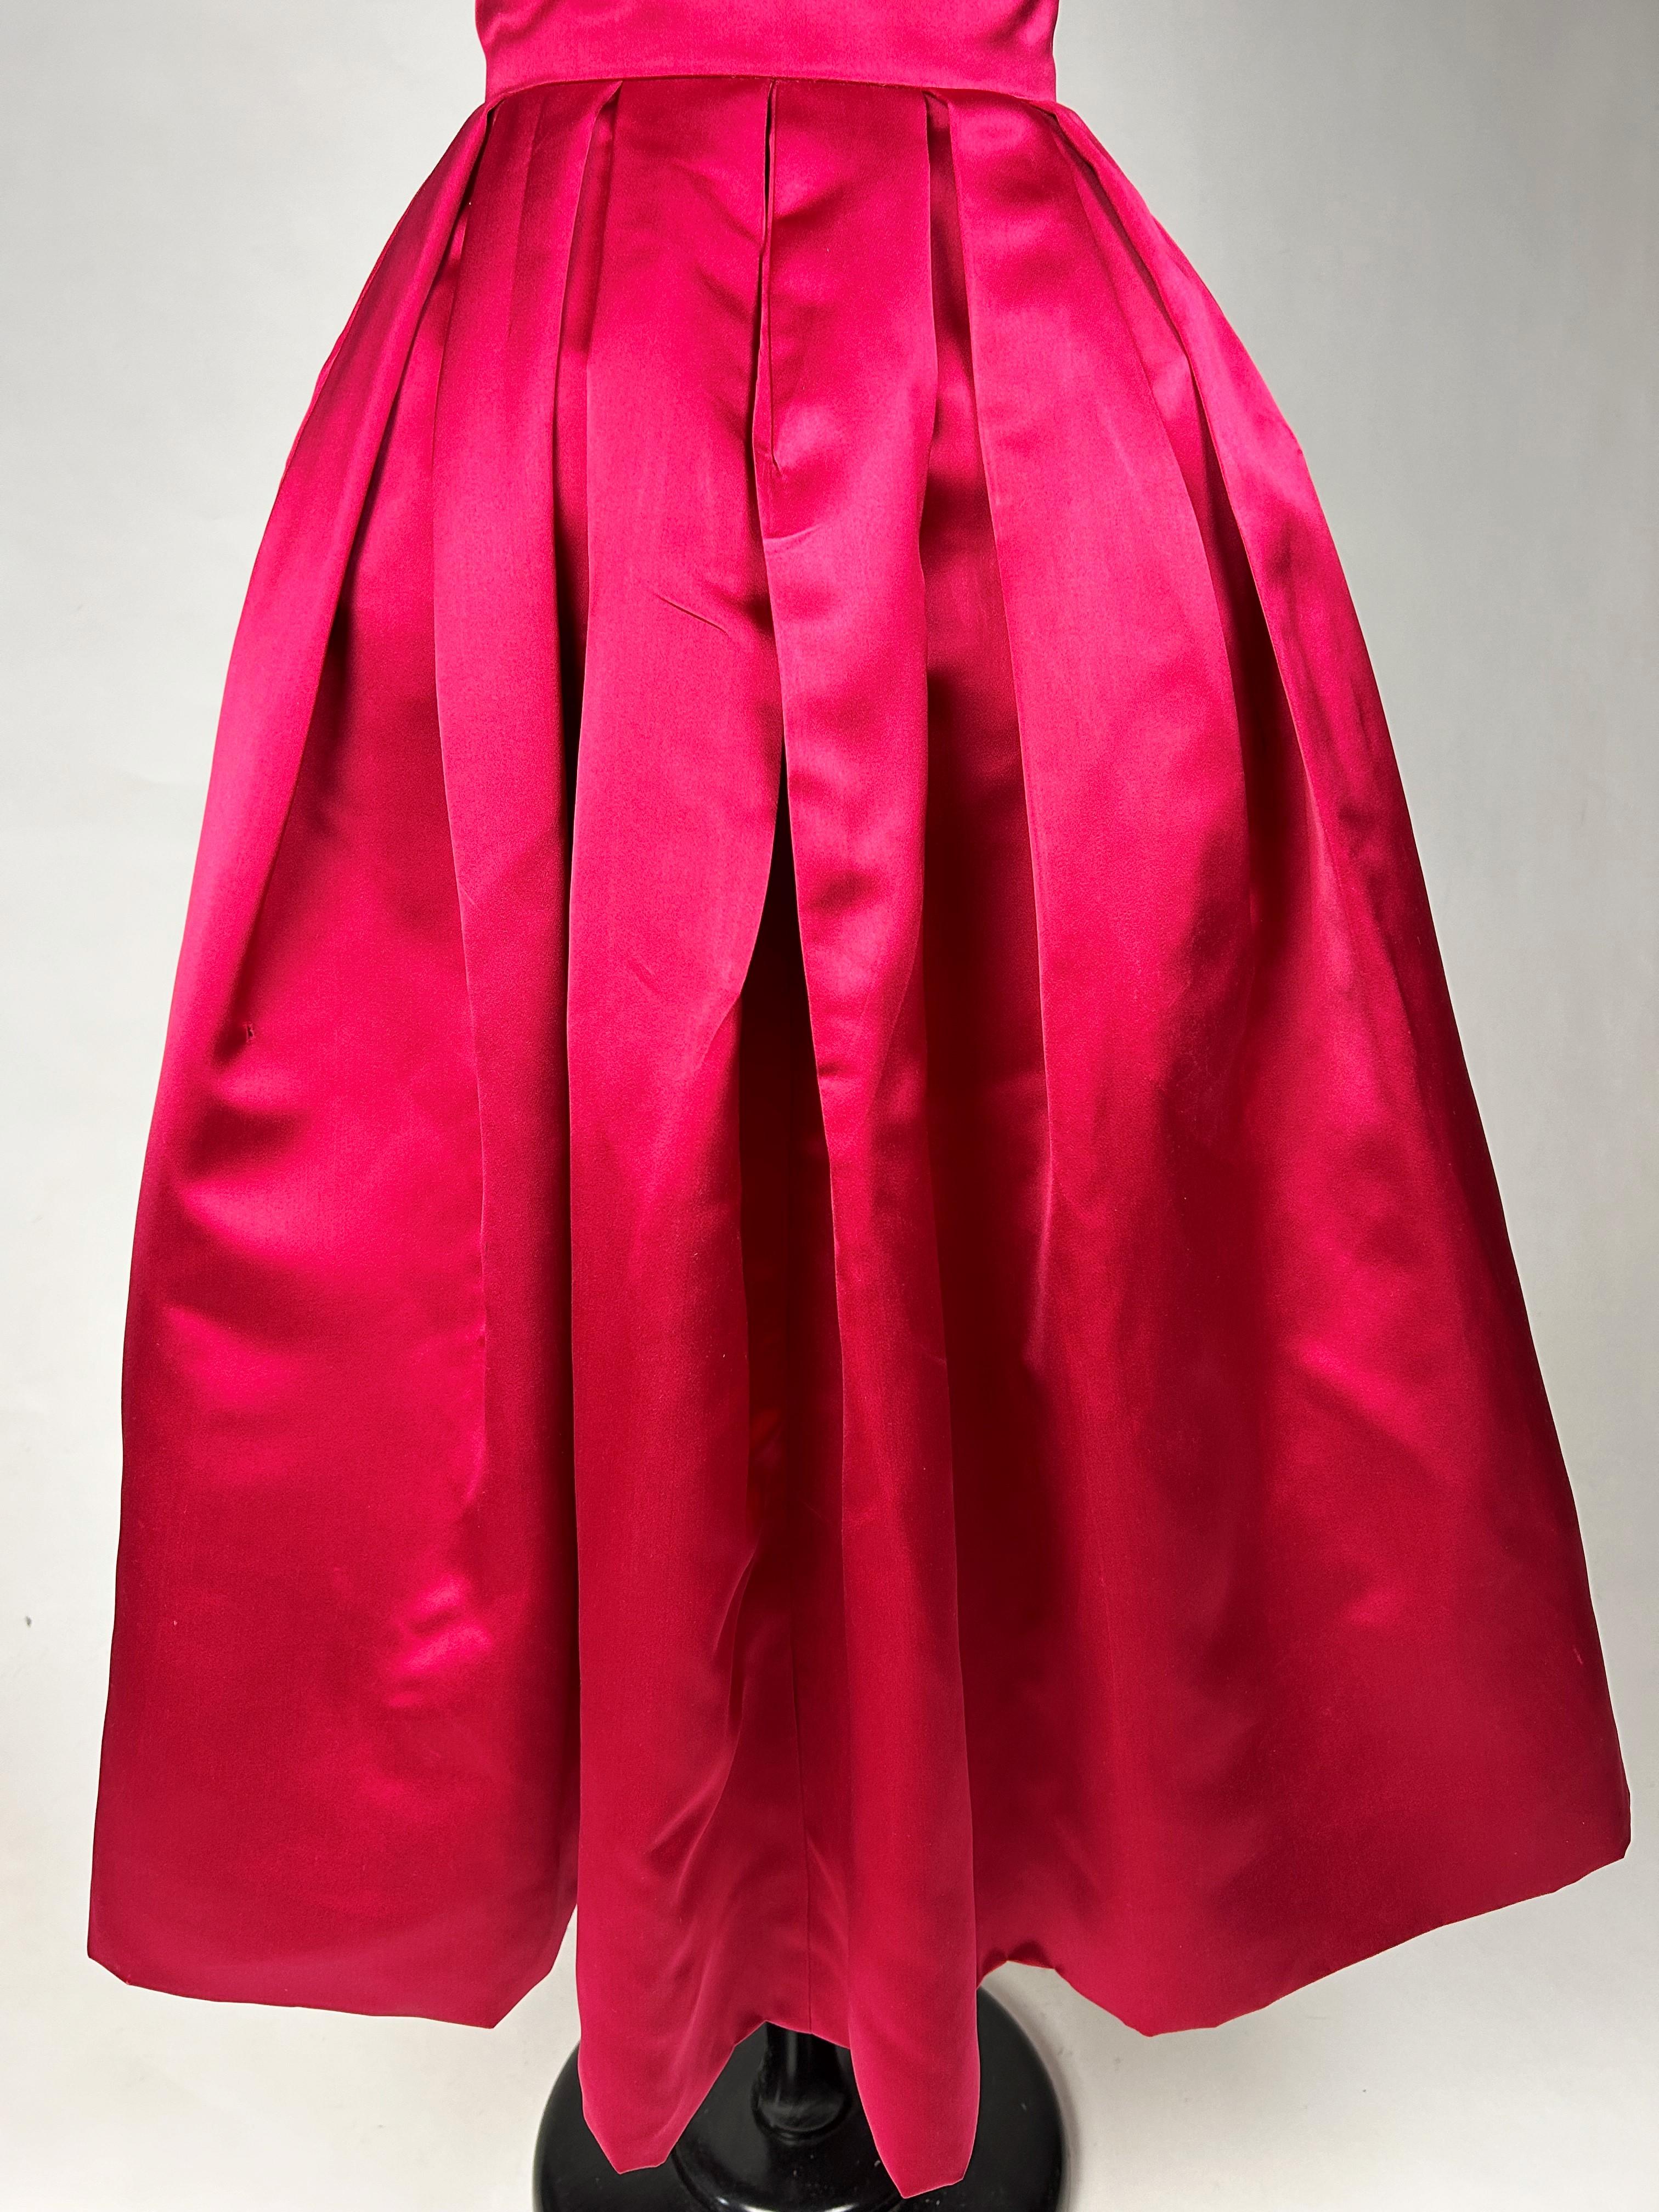 Cocktail dress in raspberry satin in the style of Christian Dior - Paris C. 1955 12